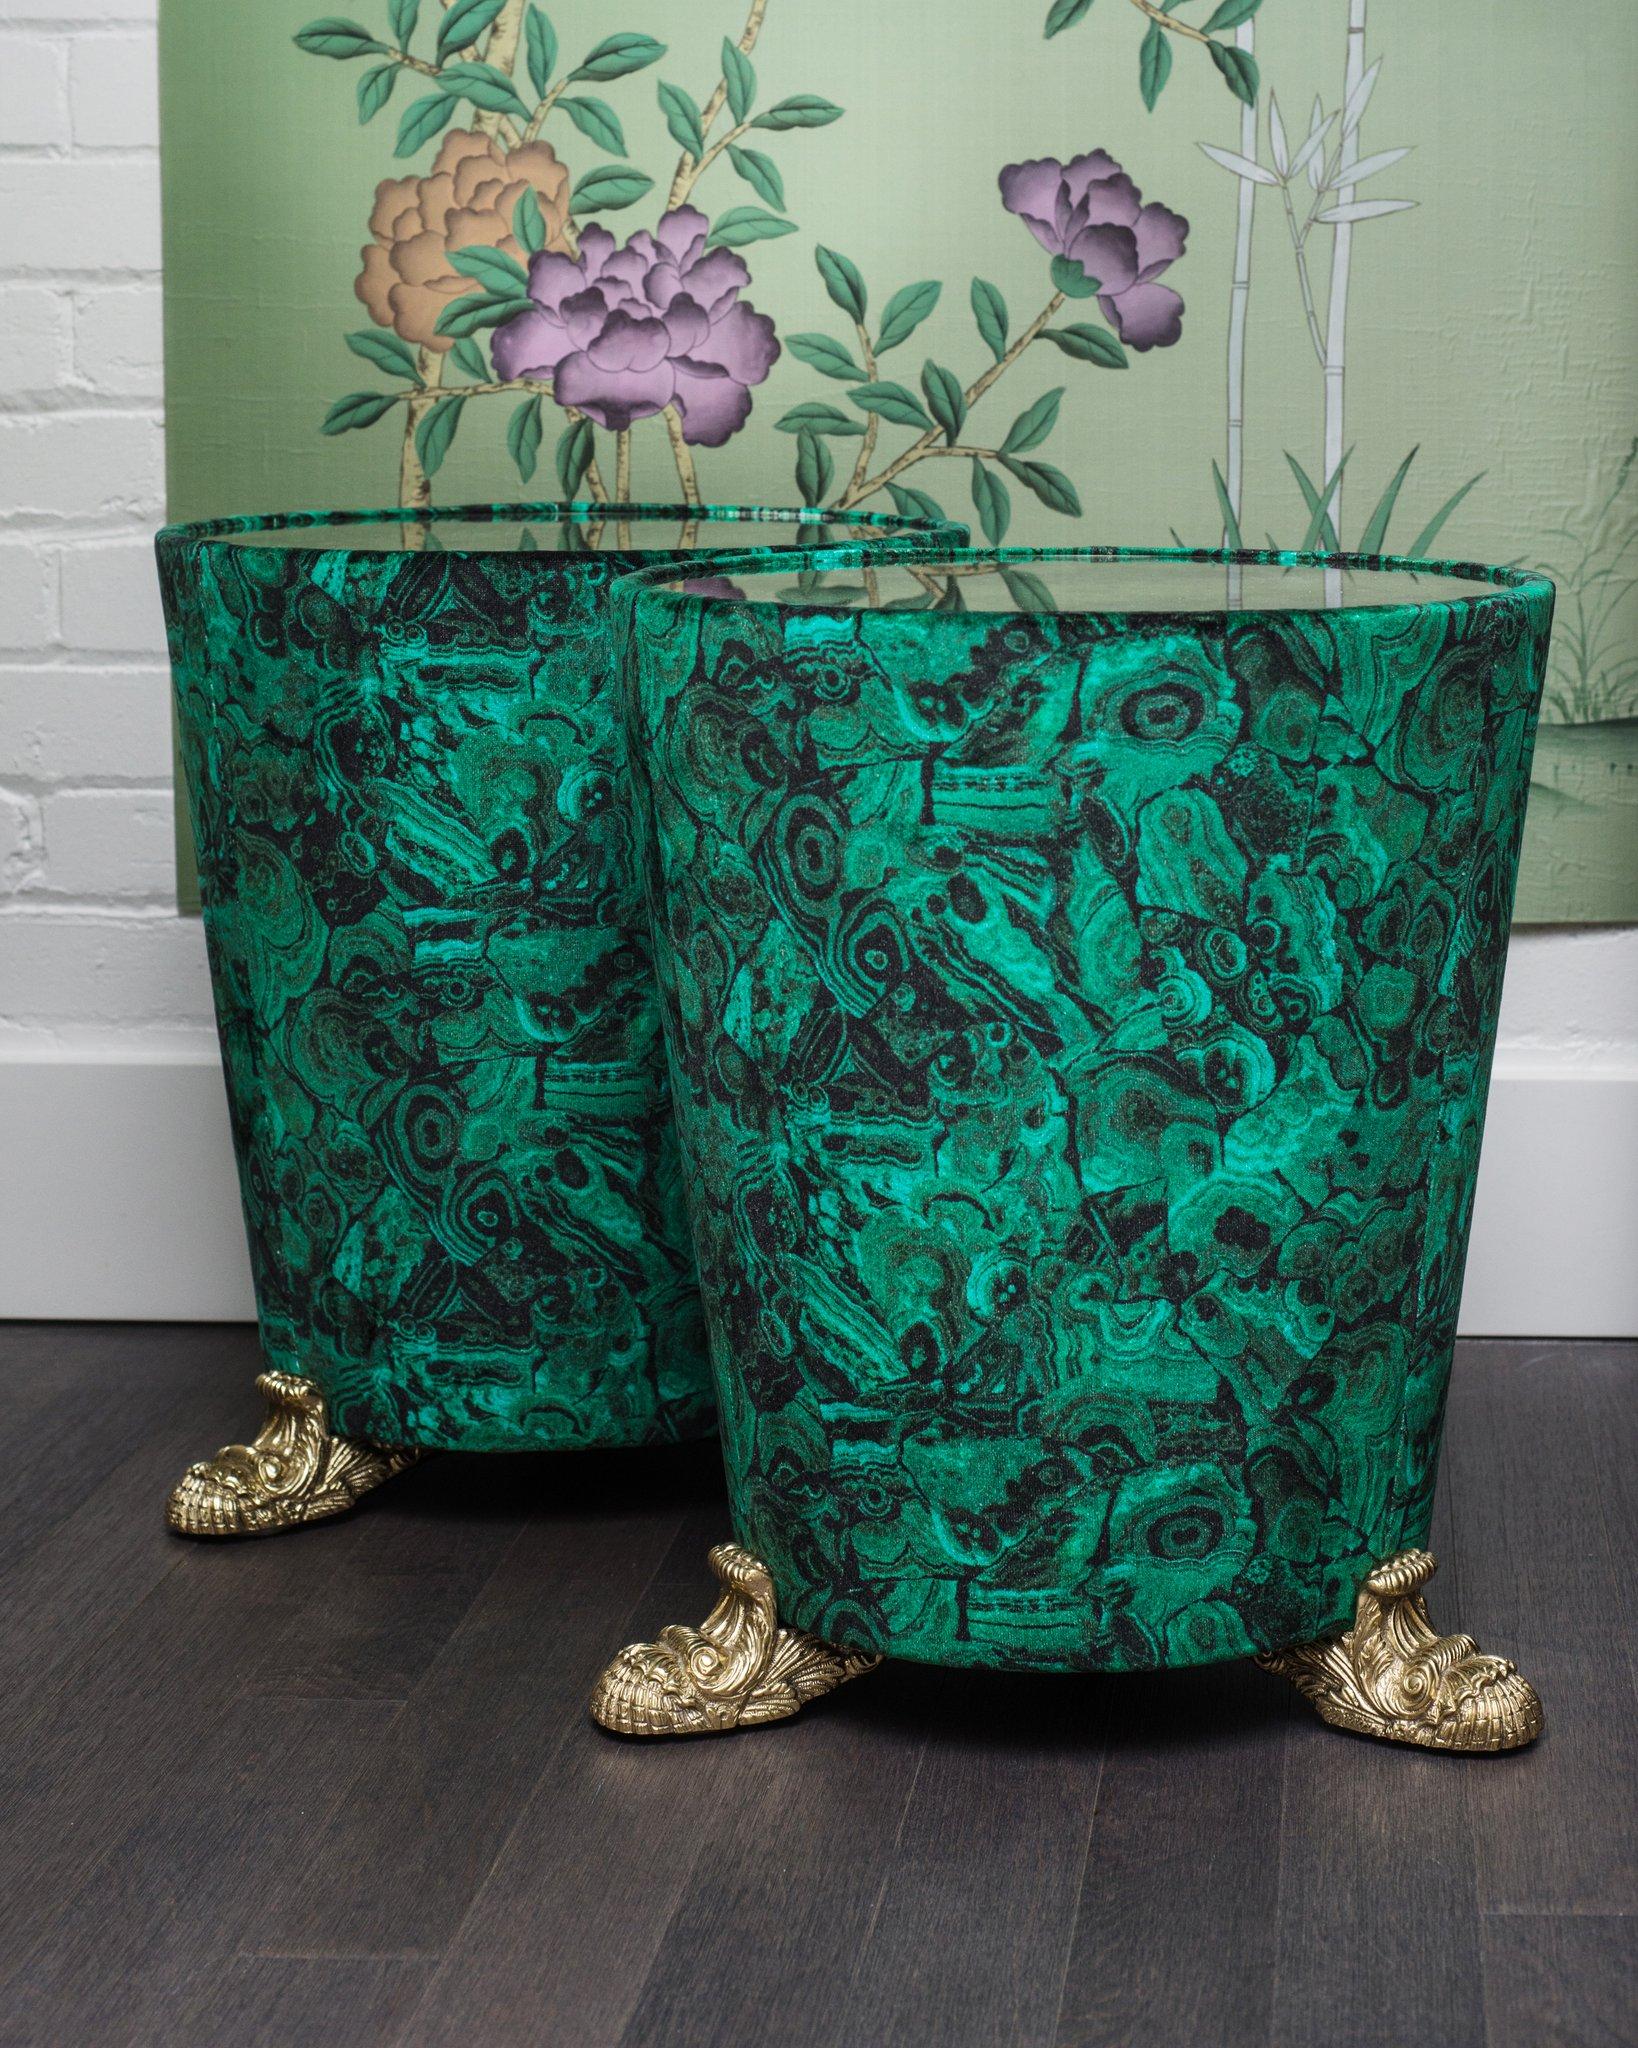 Introducing a new exclusive design from Studio Maison Nurita, an extravagant handmade side table in malachite velvet. Perfection is in the details and these rich tables are upholstered in a Nobilis fabric, with antique mirrored tops and elegant